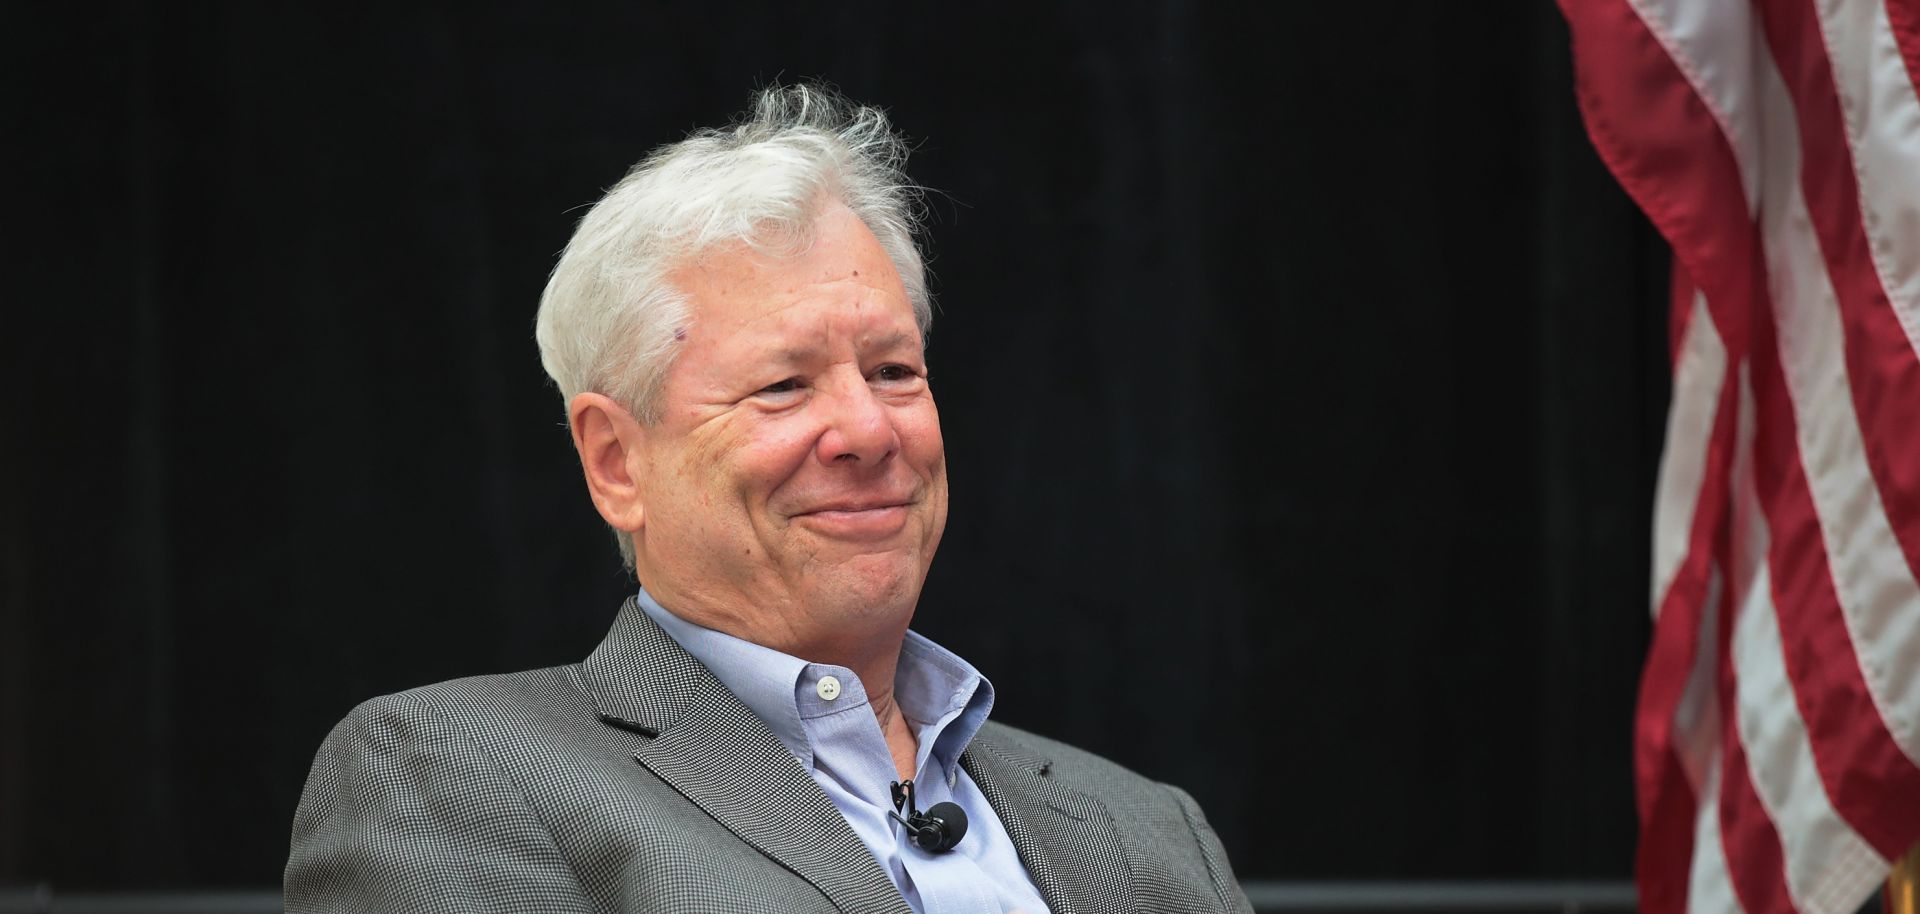 University of Chicago Professor Richard Thaler speaks to guests after learning he had been awarded the Nobel Prize in Economics on Oct. 9.